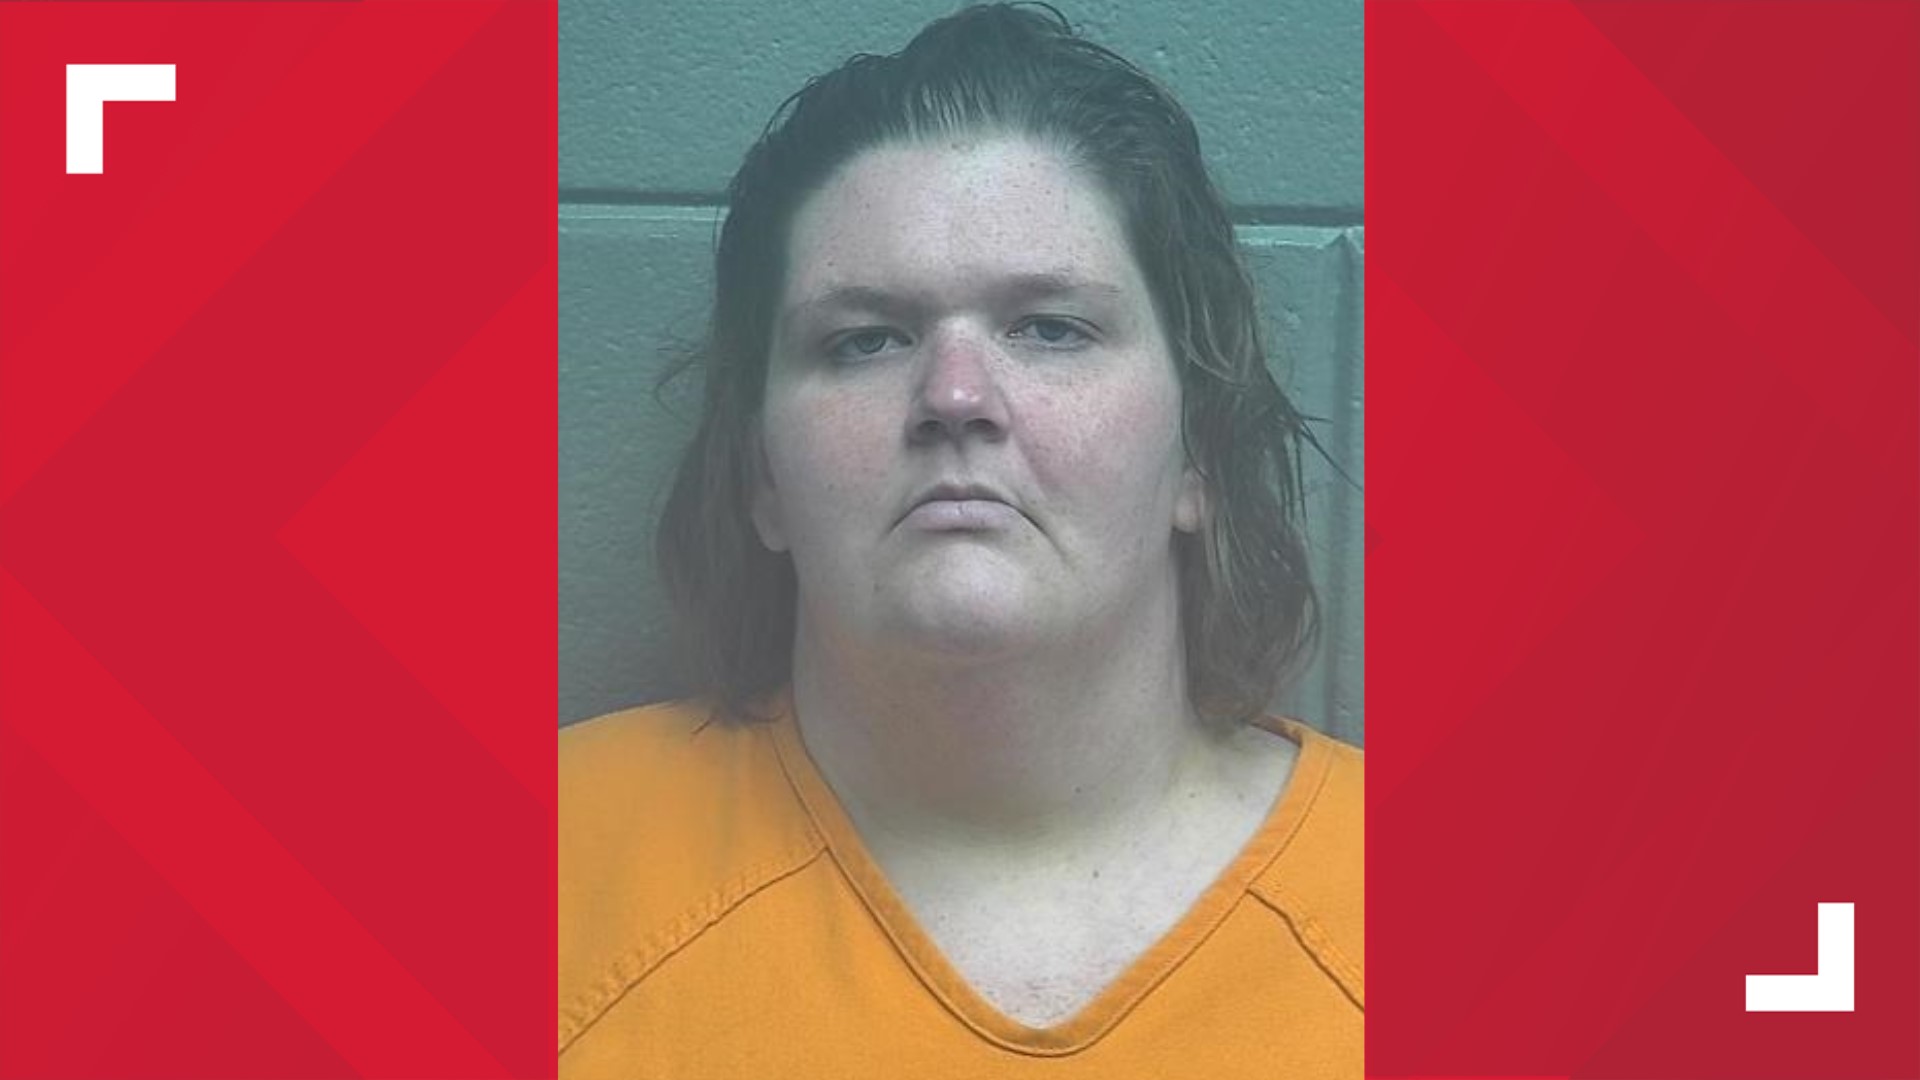 Prosecutors said Heather Adkins, of Shelbyville, drove her 5-year-old son to a Cincinnati suburb on a rainy February day and left him on a dead-end road.